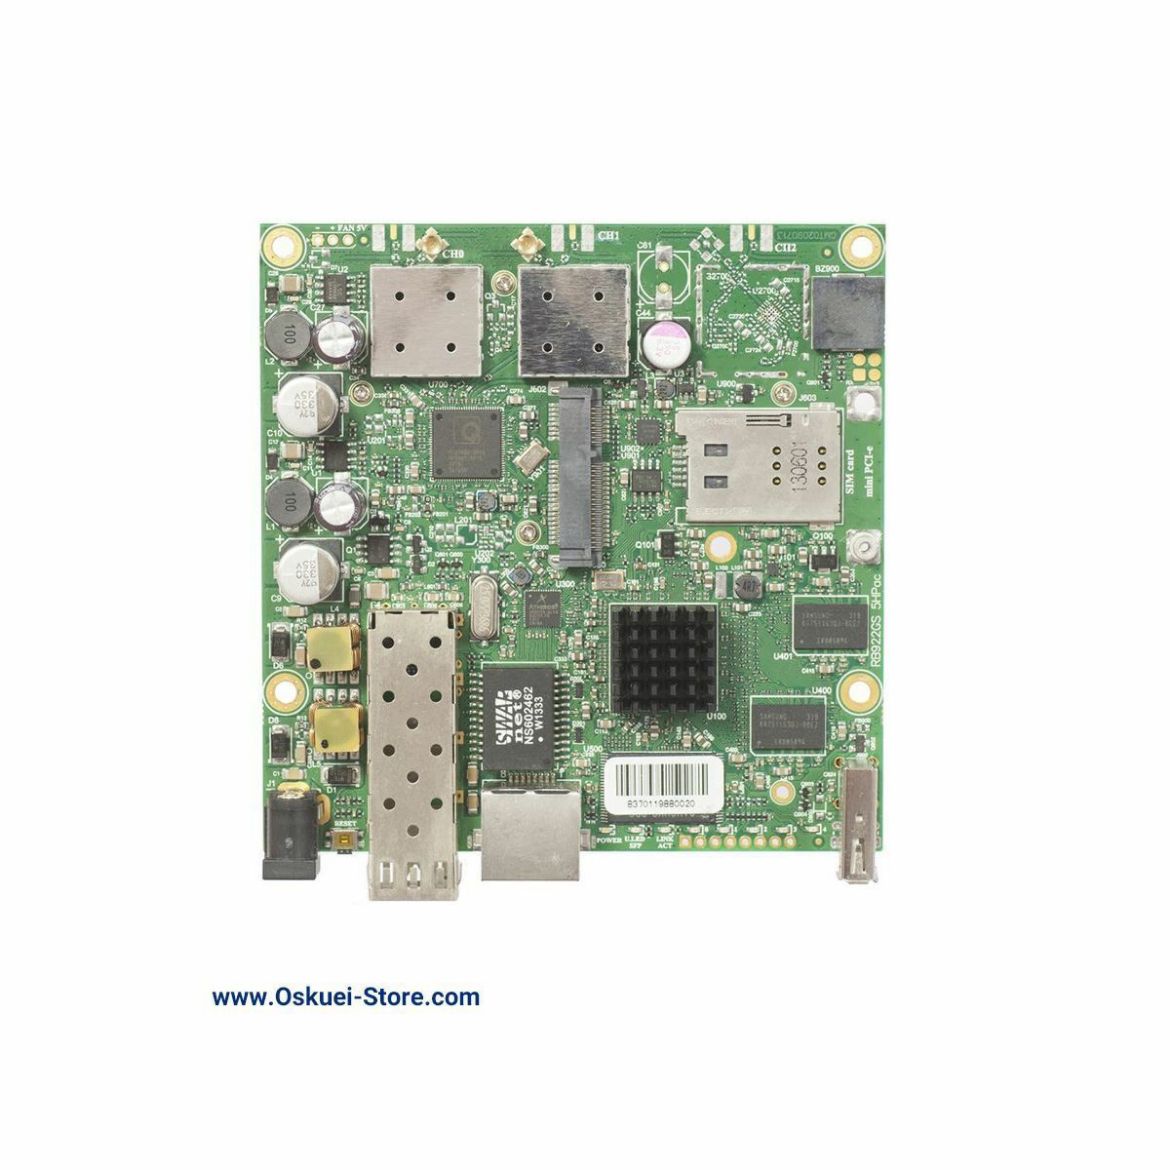 MikroTik RB922UAGS-5HPacD Router Board Front